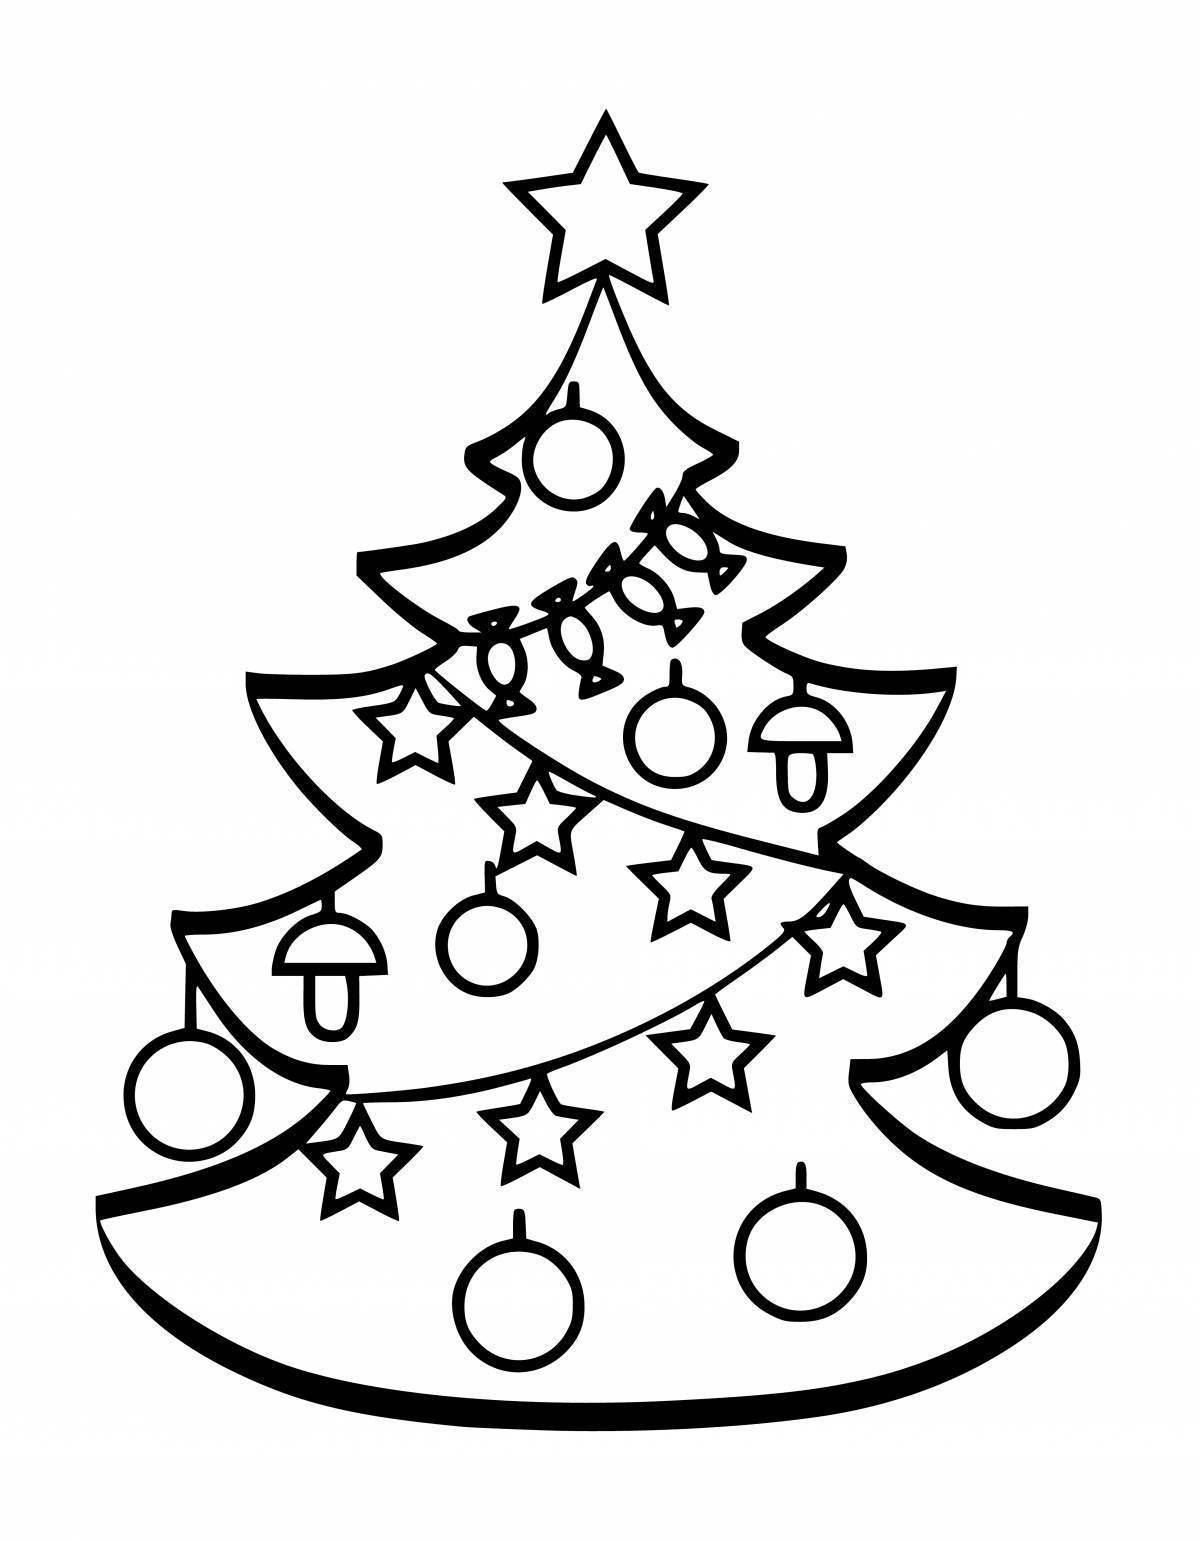 Glamourous Christmas tree coloring book for children 5-6 years old